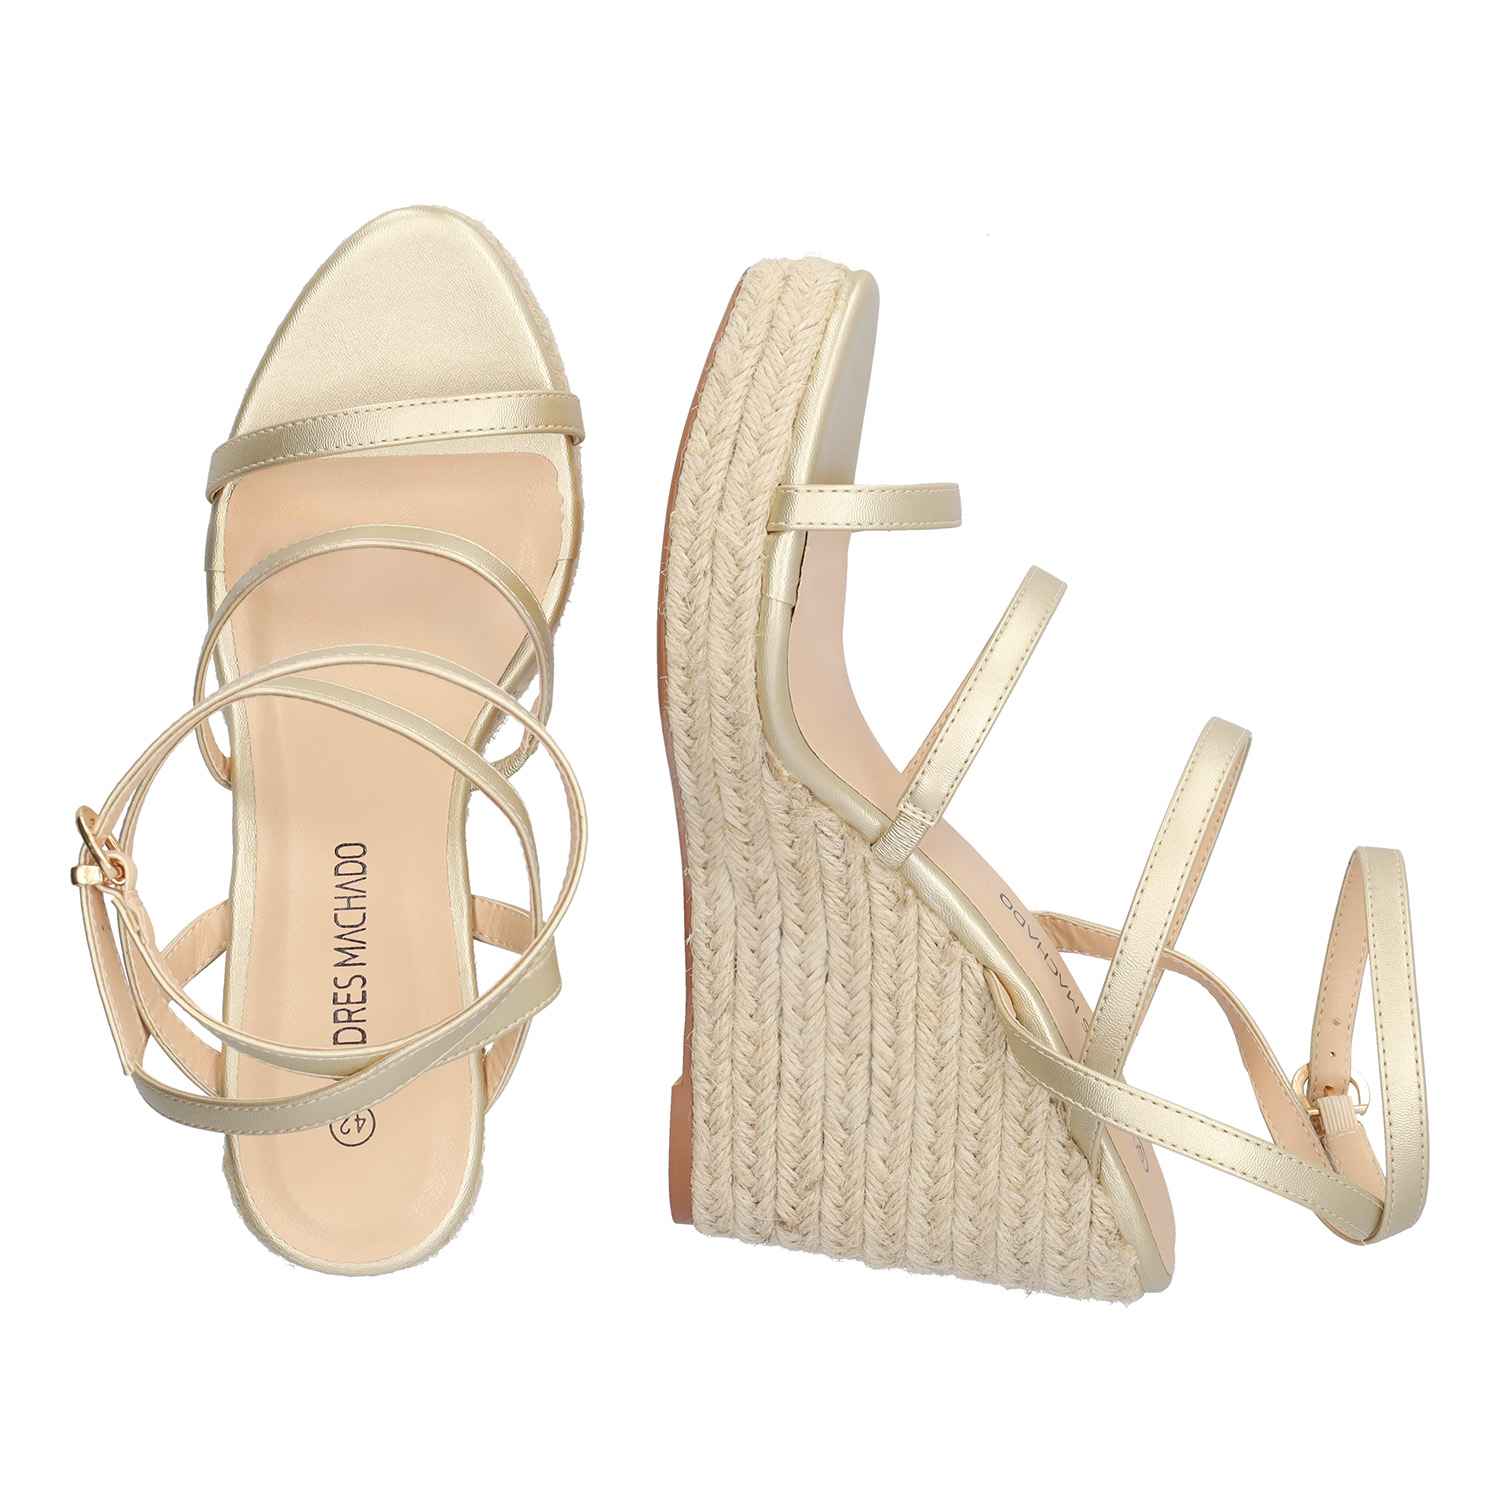 Golden soft fabric sandal with a jute wedge 